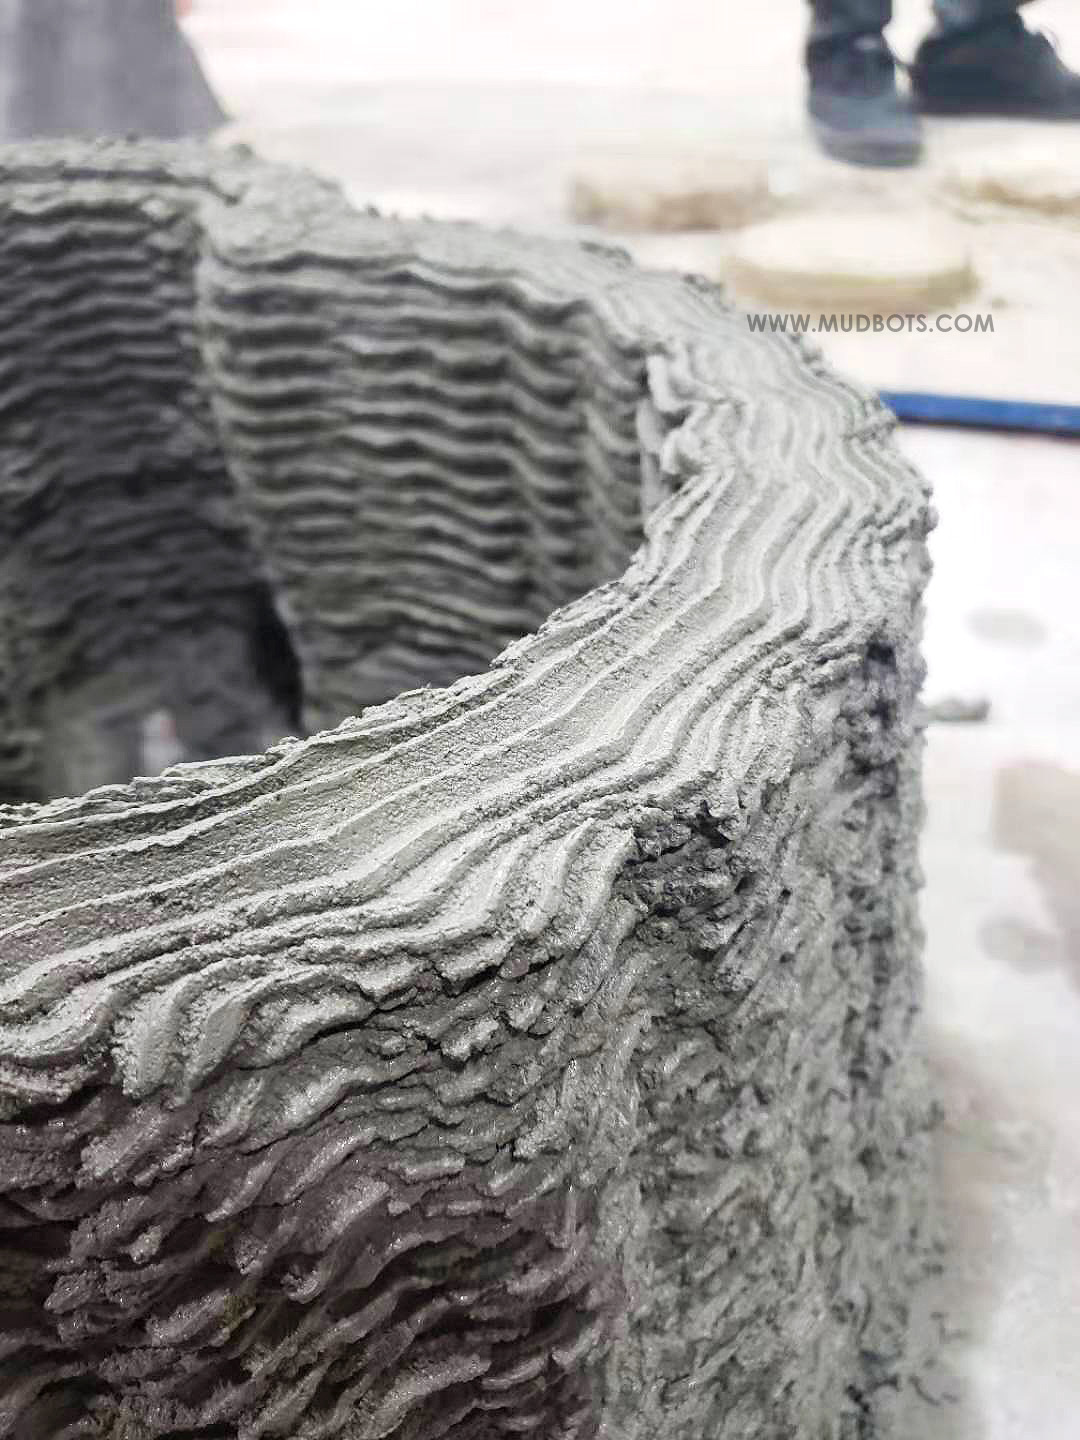 Here is a close up view of layer by layer printing of concrete structure